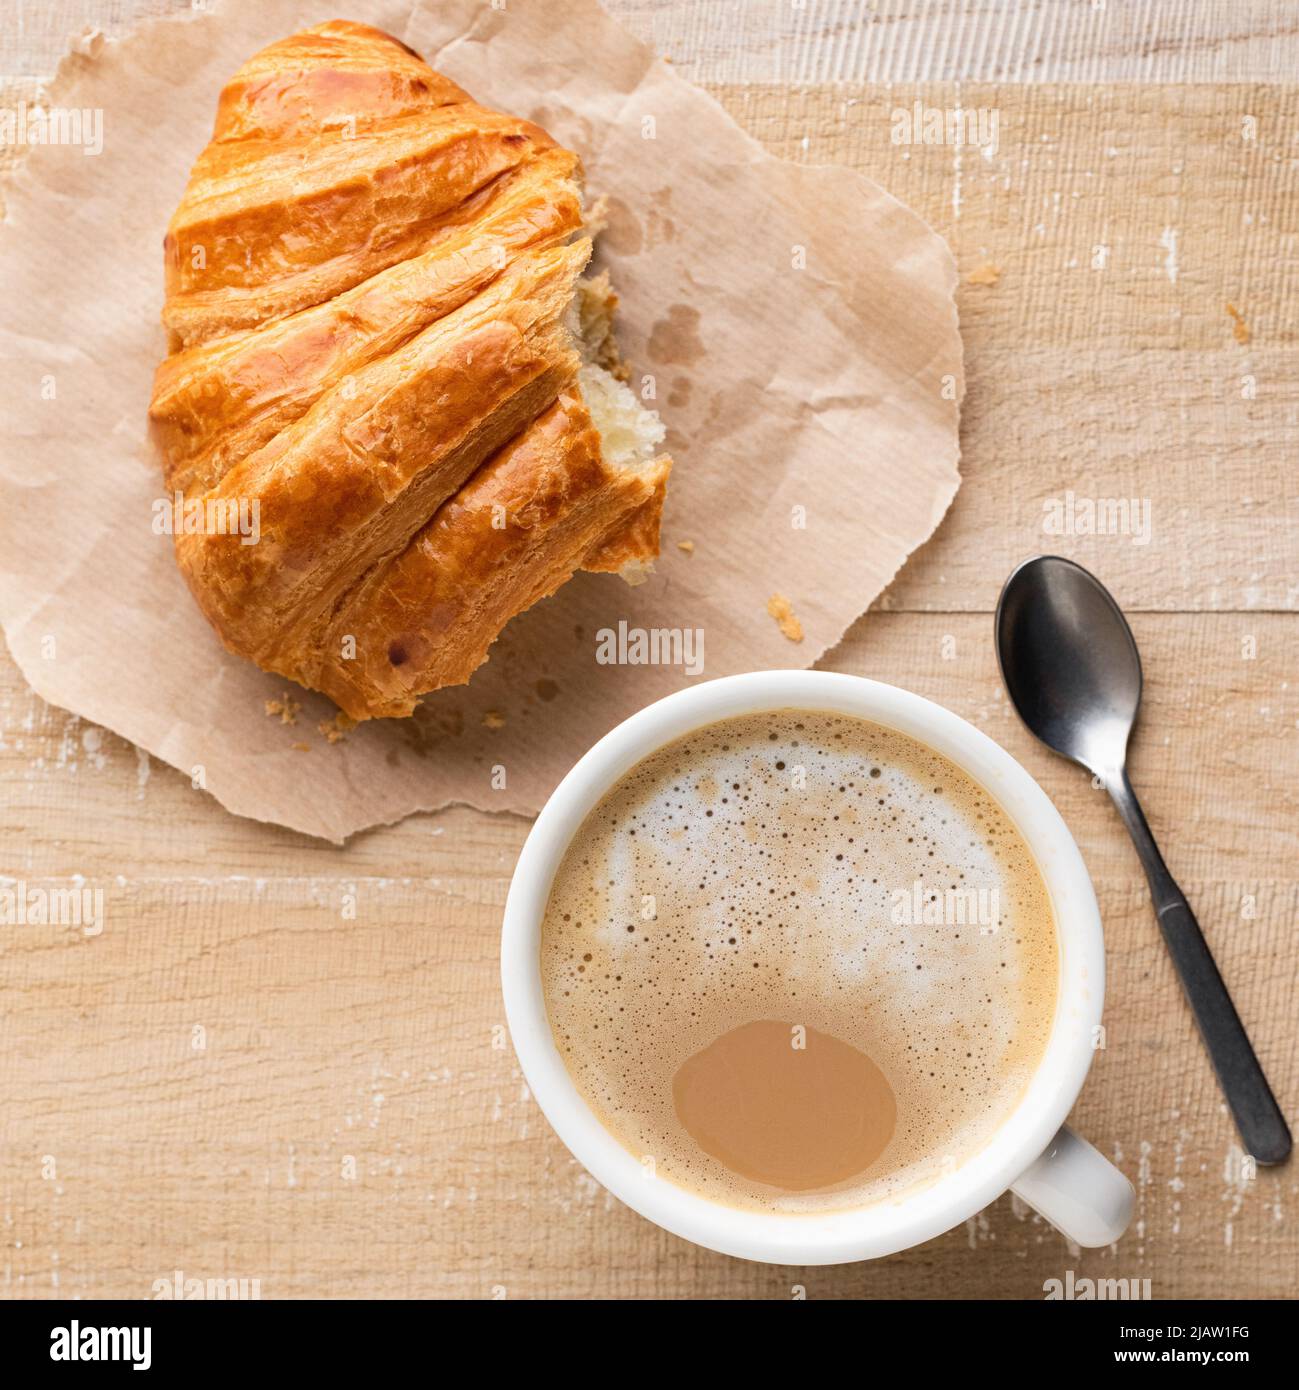 Cup of coffee and croissant on wooden table, top view. Breakfast in cafe or coffee break Stock Photo